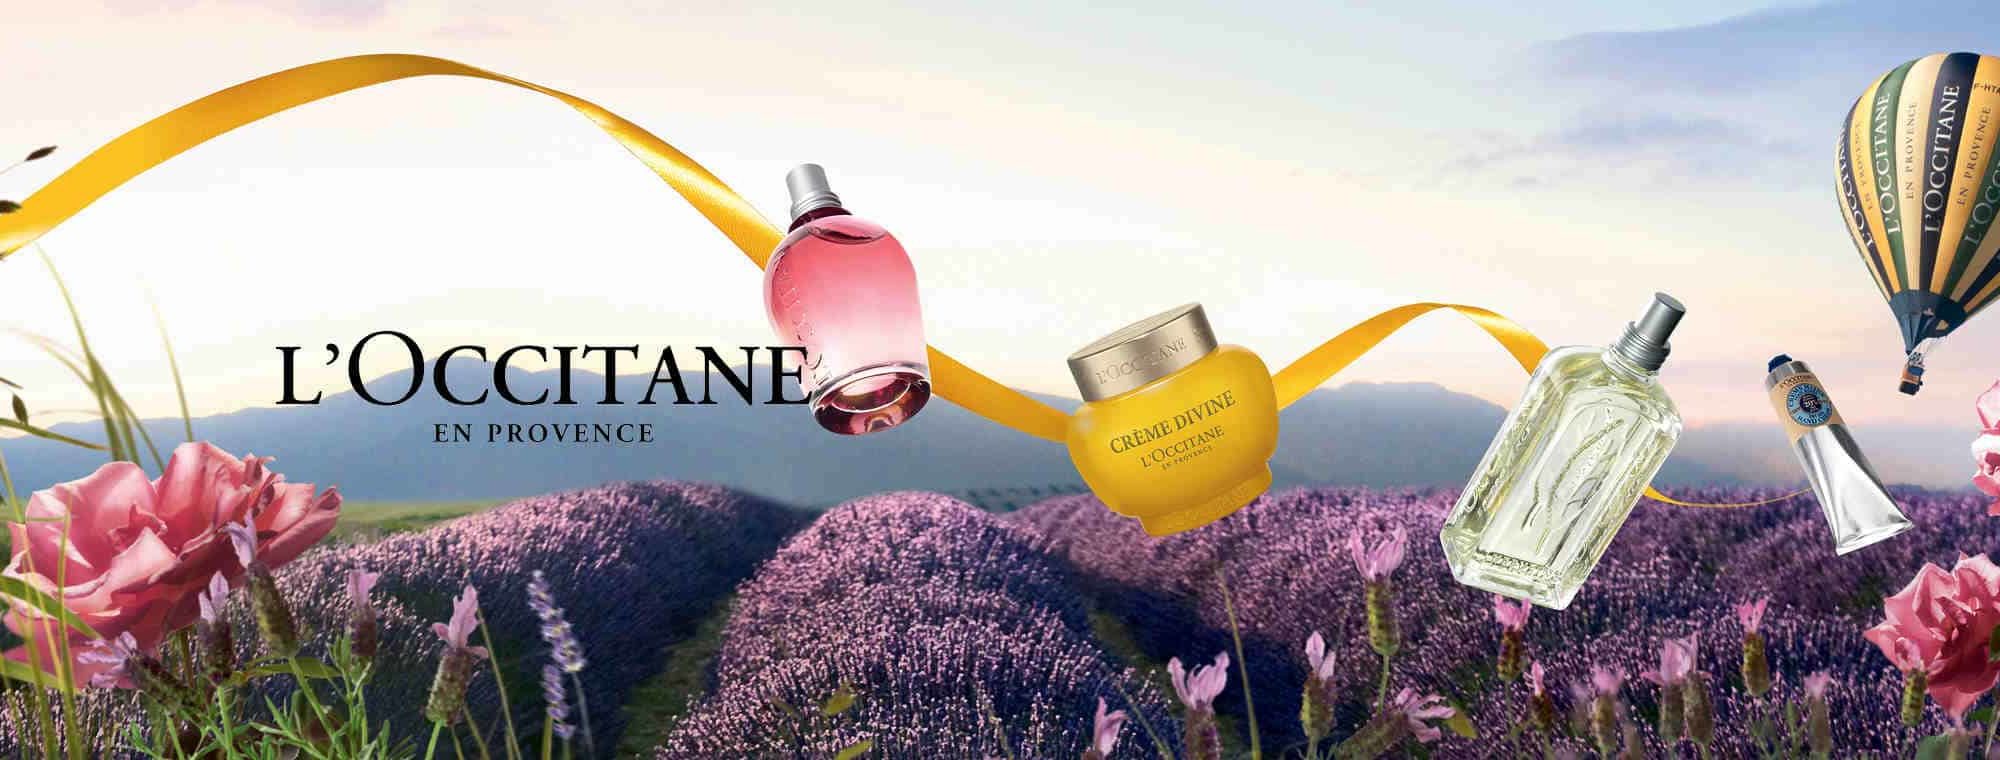 Location strategy for L’Occitane fragrance launch